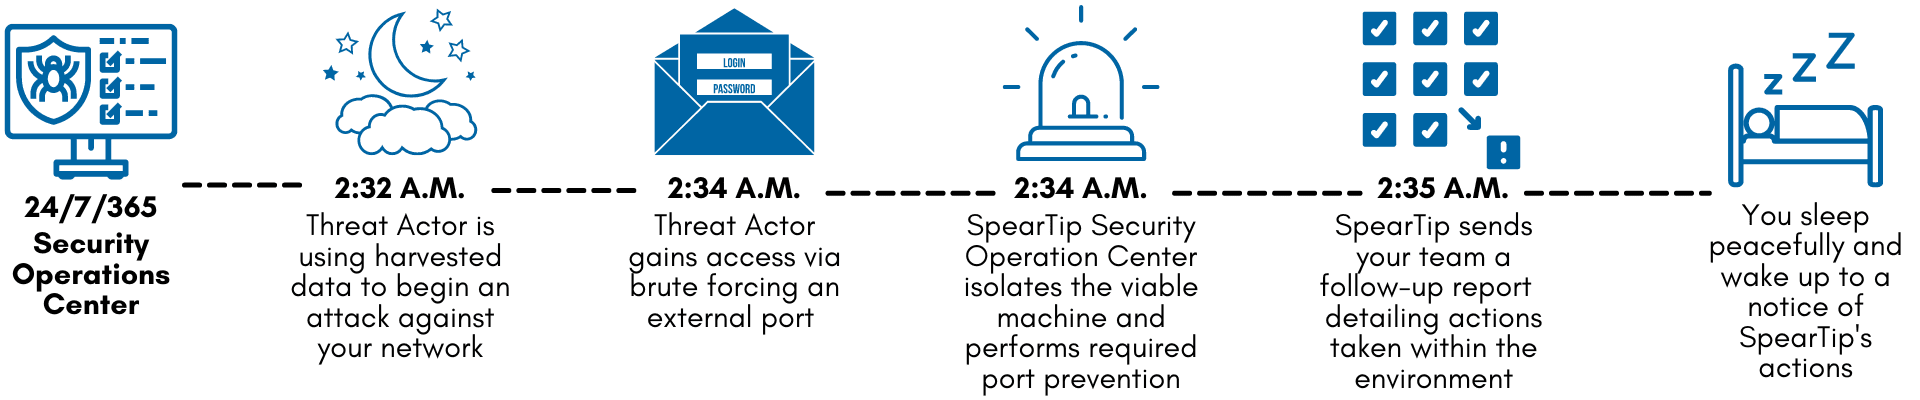 24/7 Security Operations Center timeline